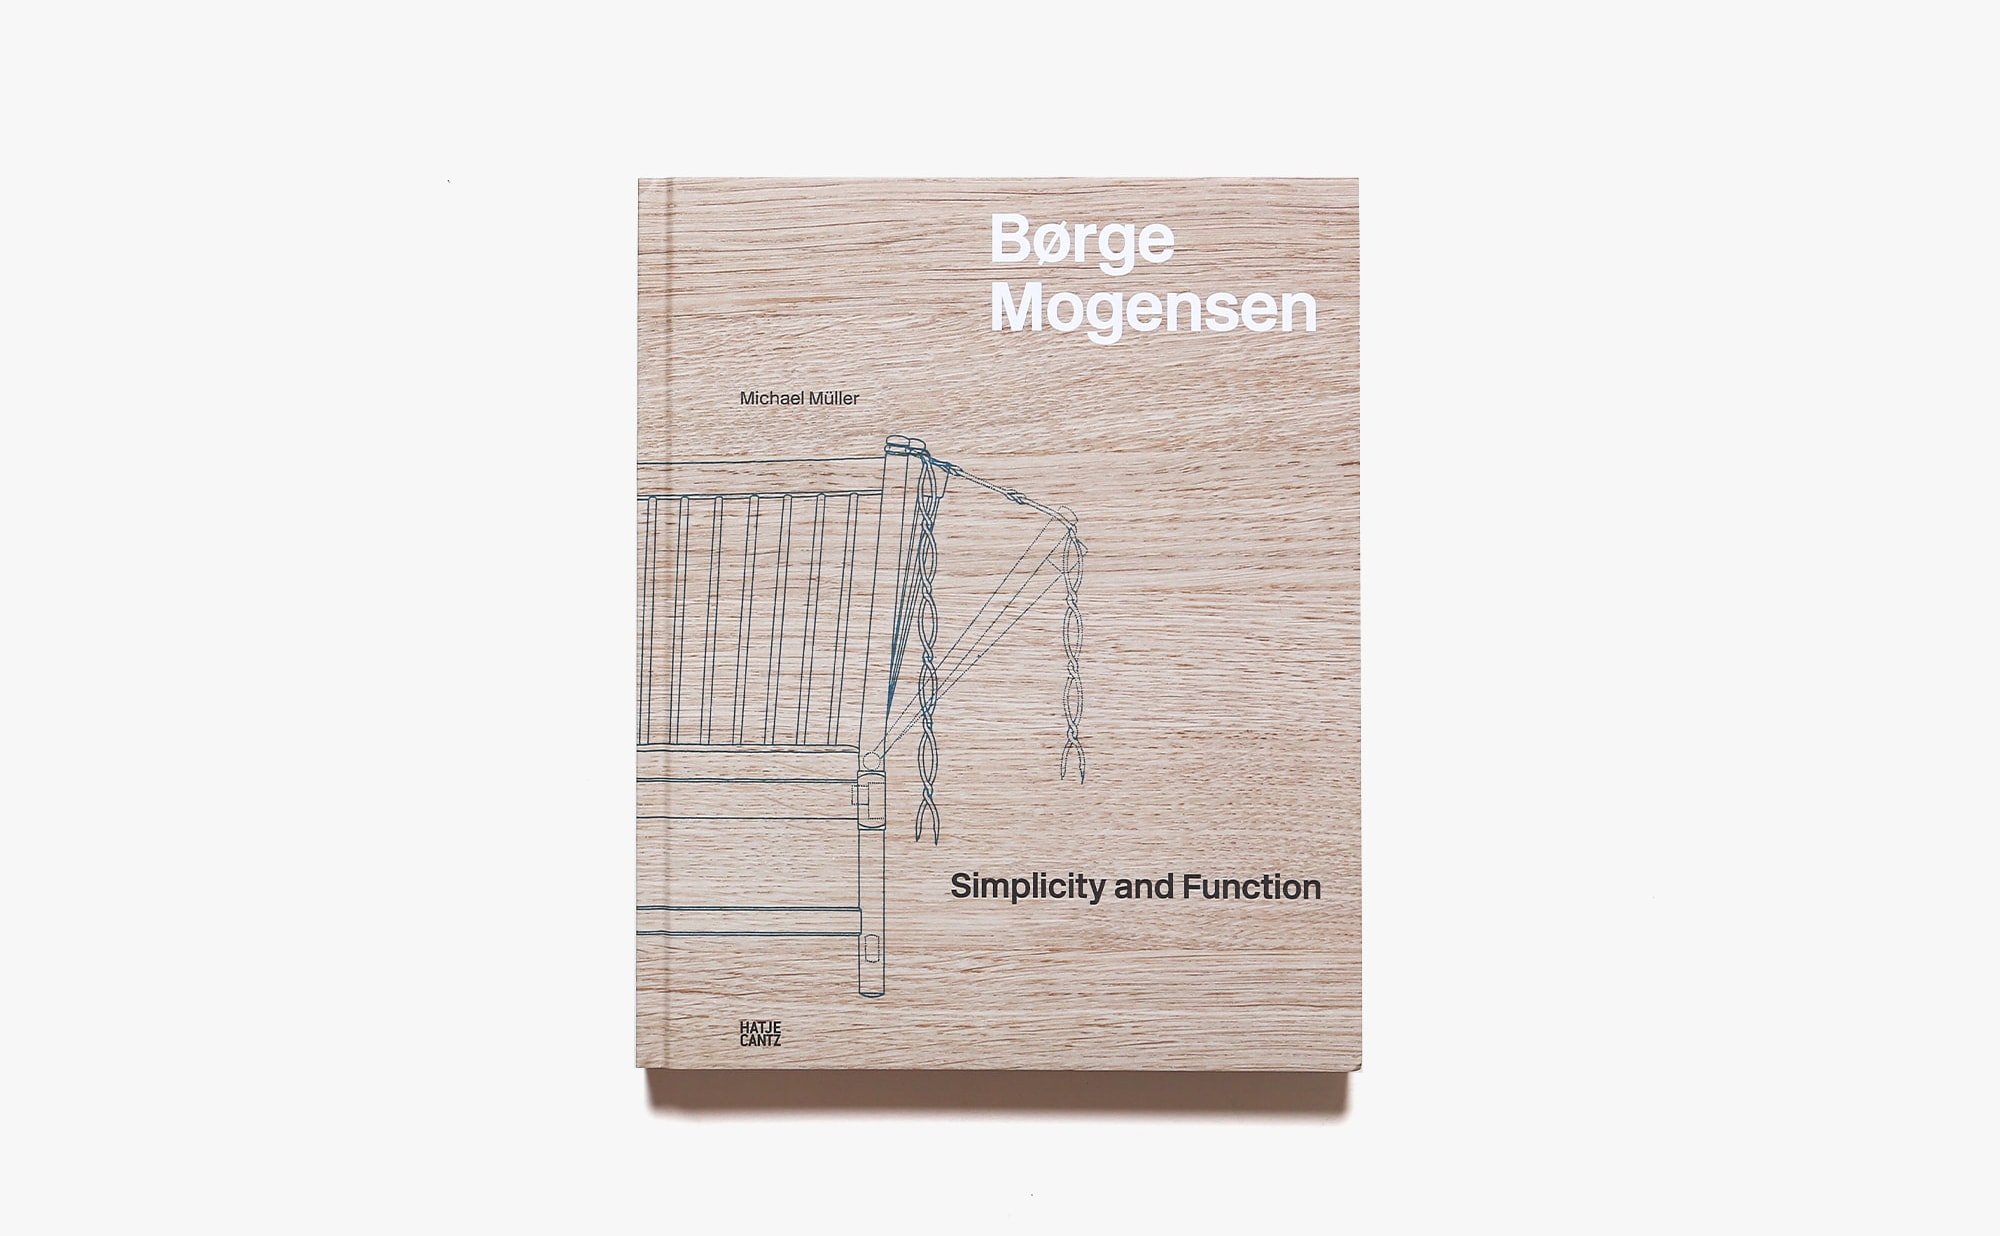 Borge Mogensen: Simplicity and Function